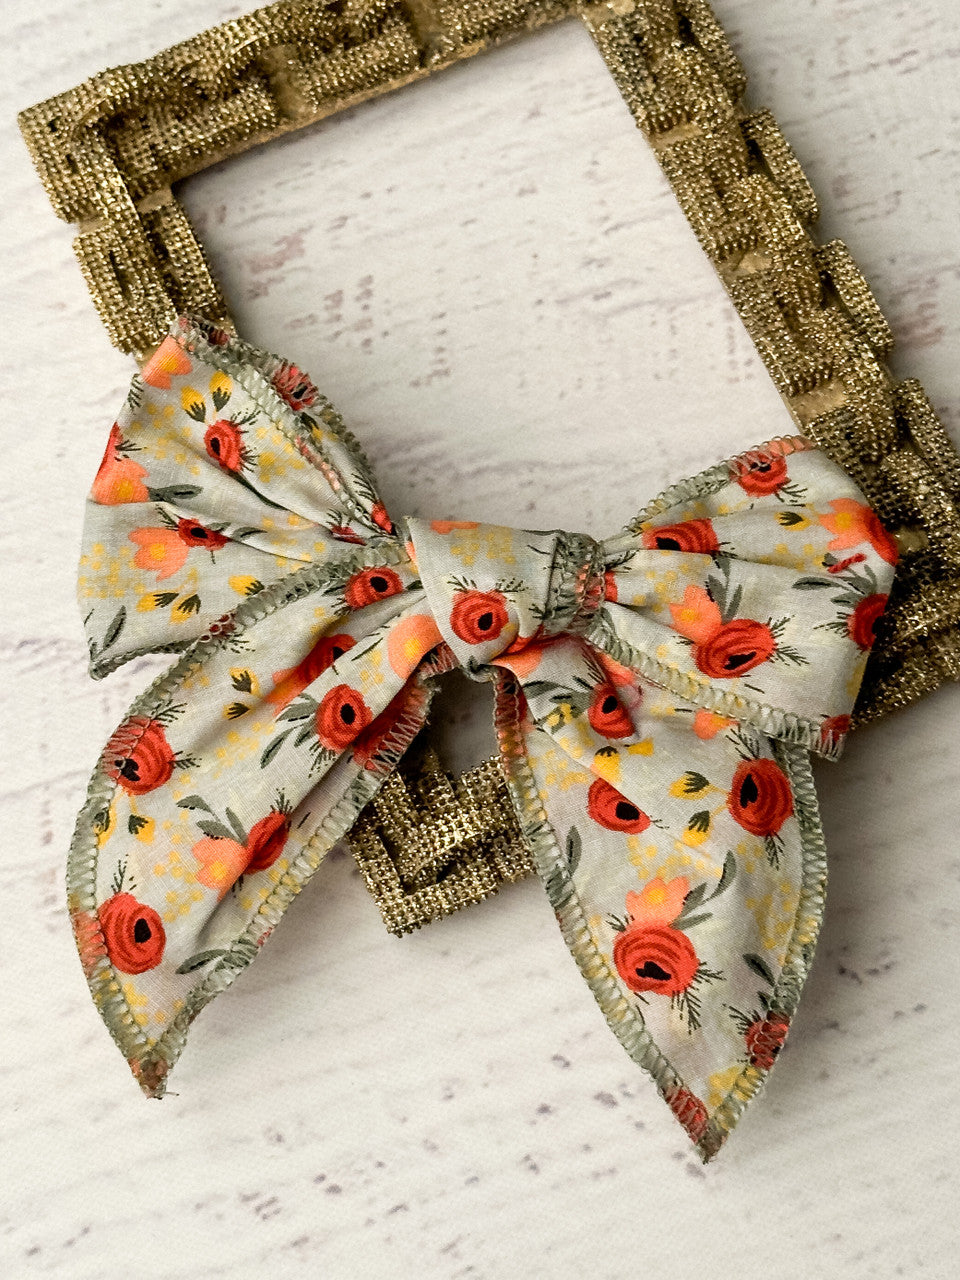 Floral print bow with a removable single alligator clip. Measures approximately 5x5 inches.